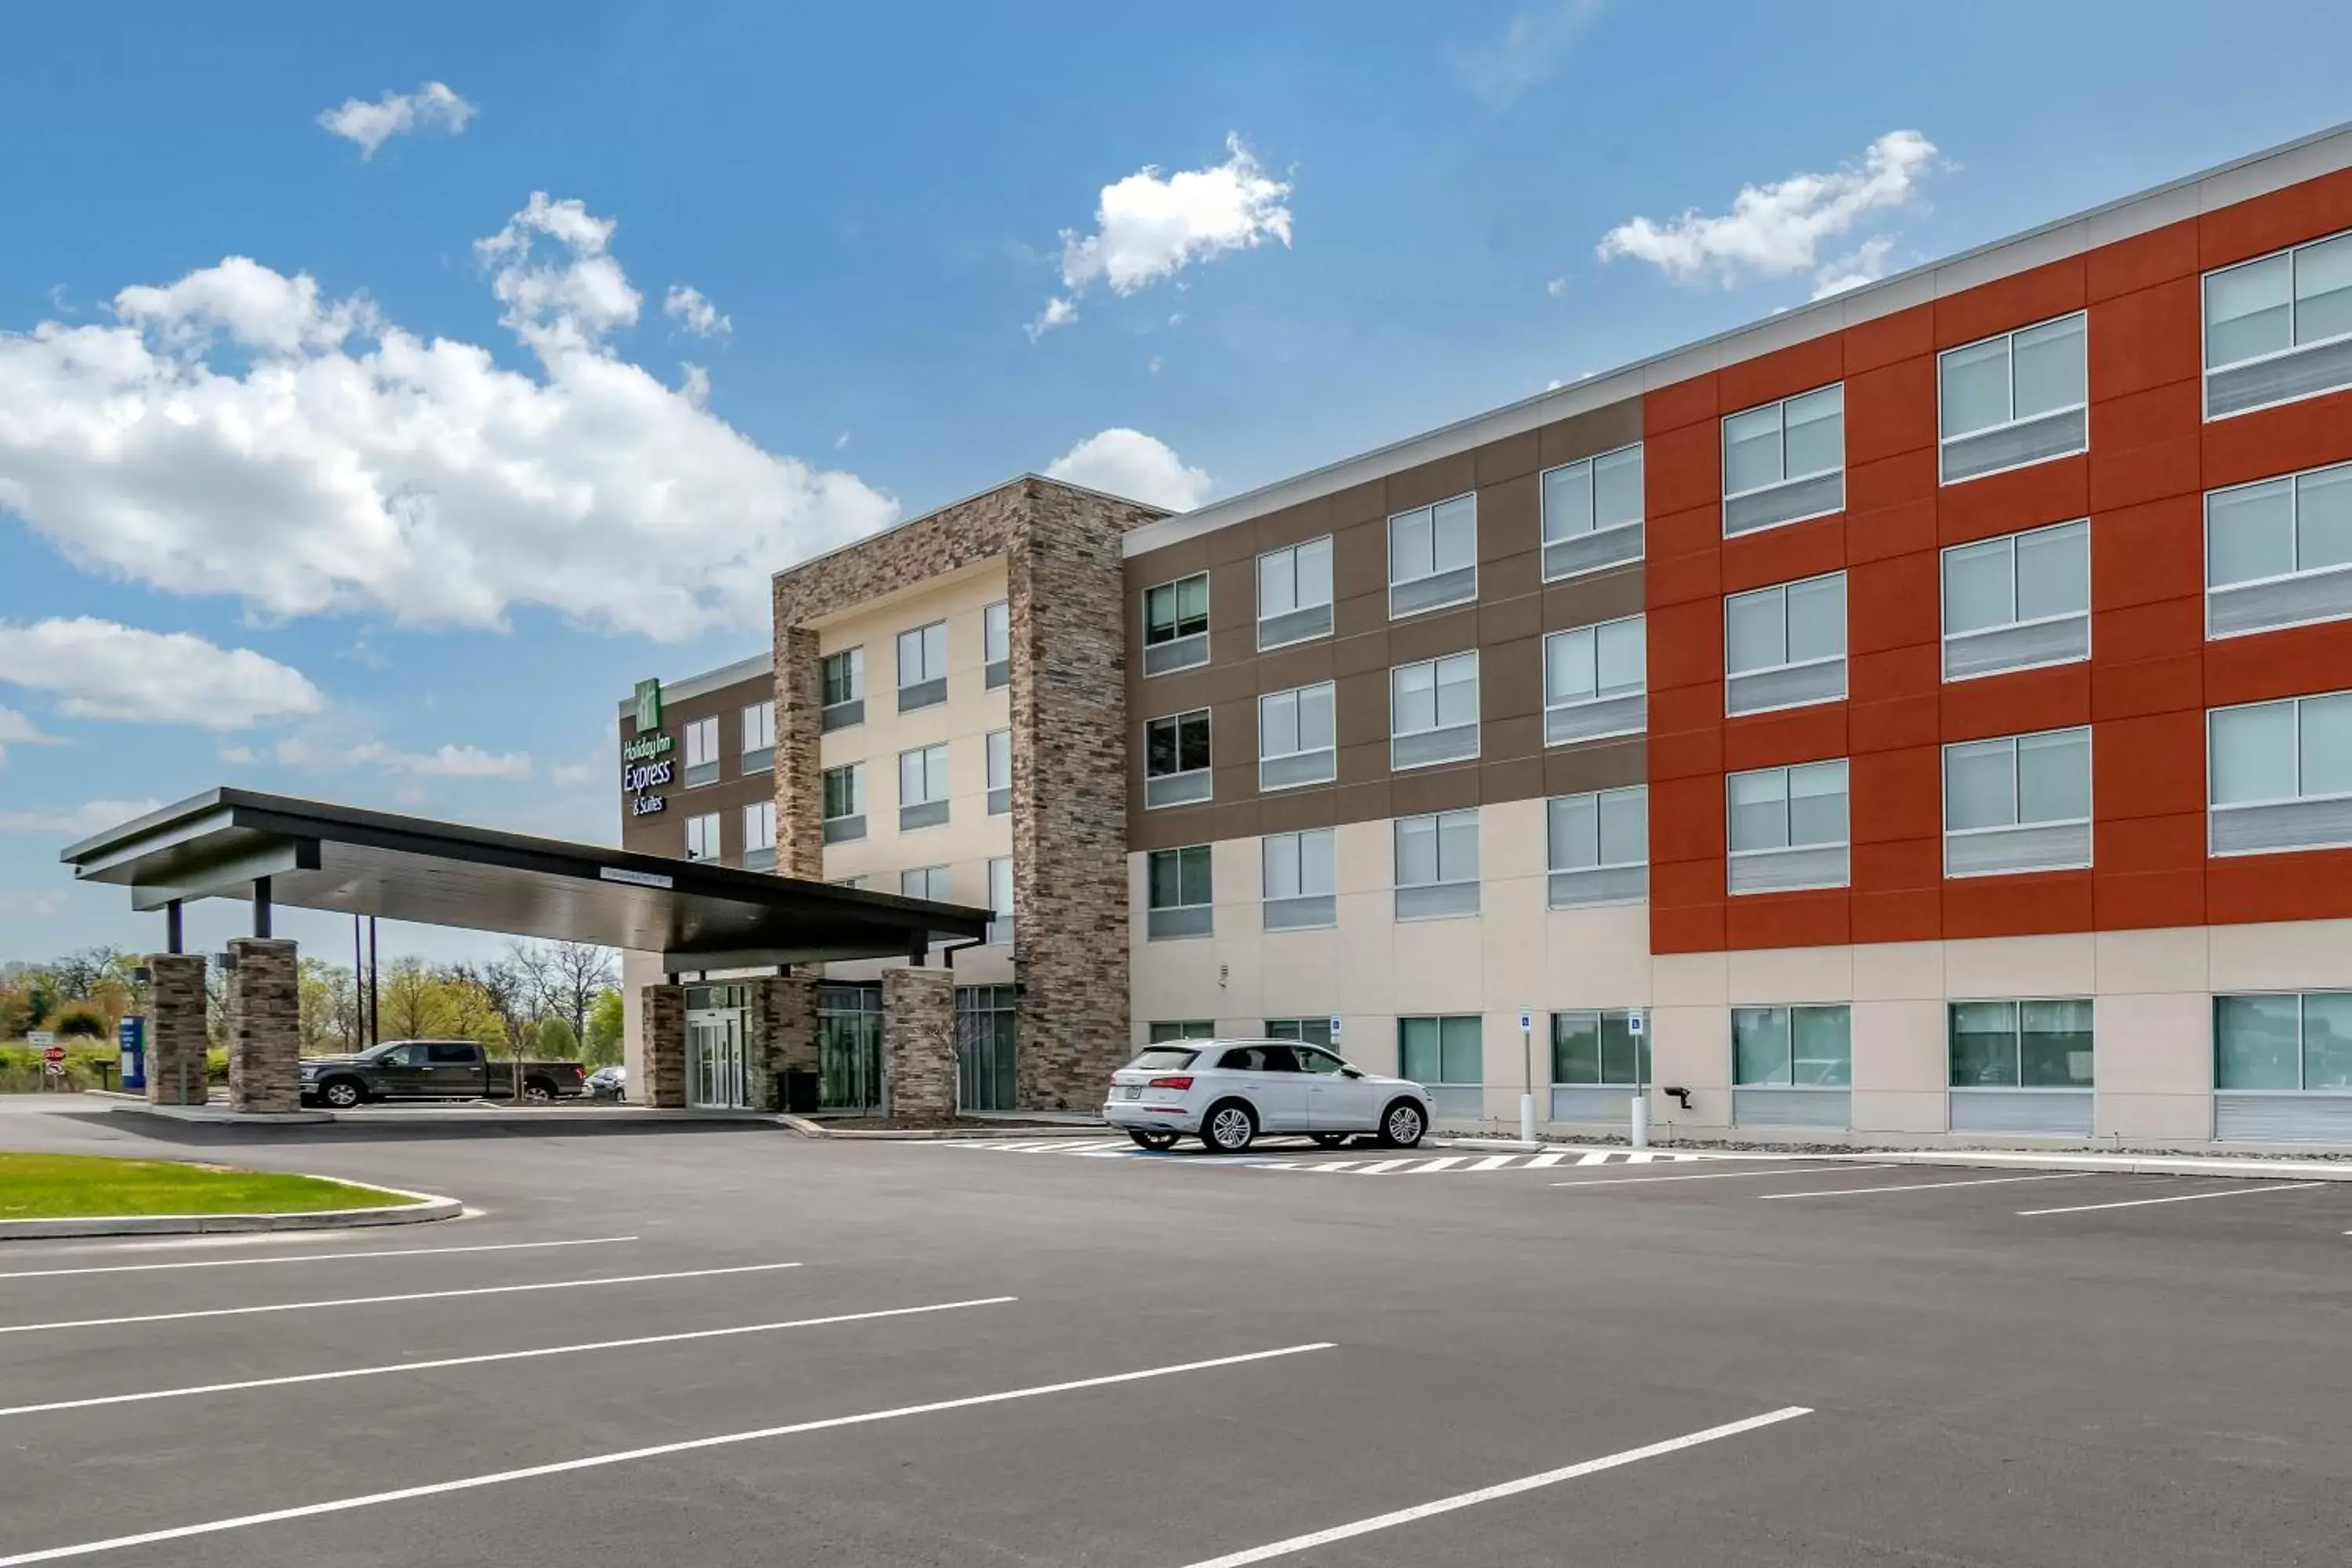 Property Building in Holiday Inn Express & Suites - Lancaster - Mount Joy, an IHG Hotel